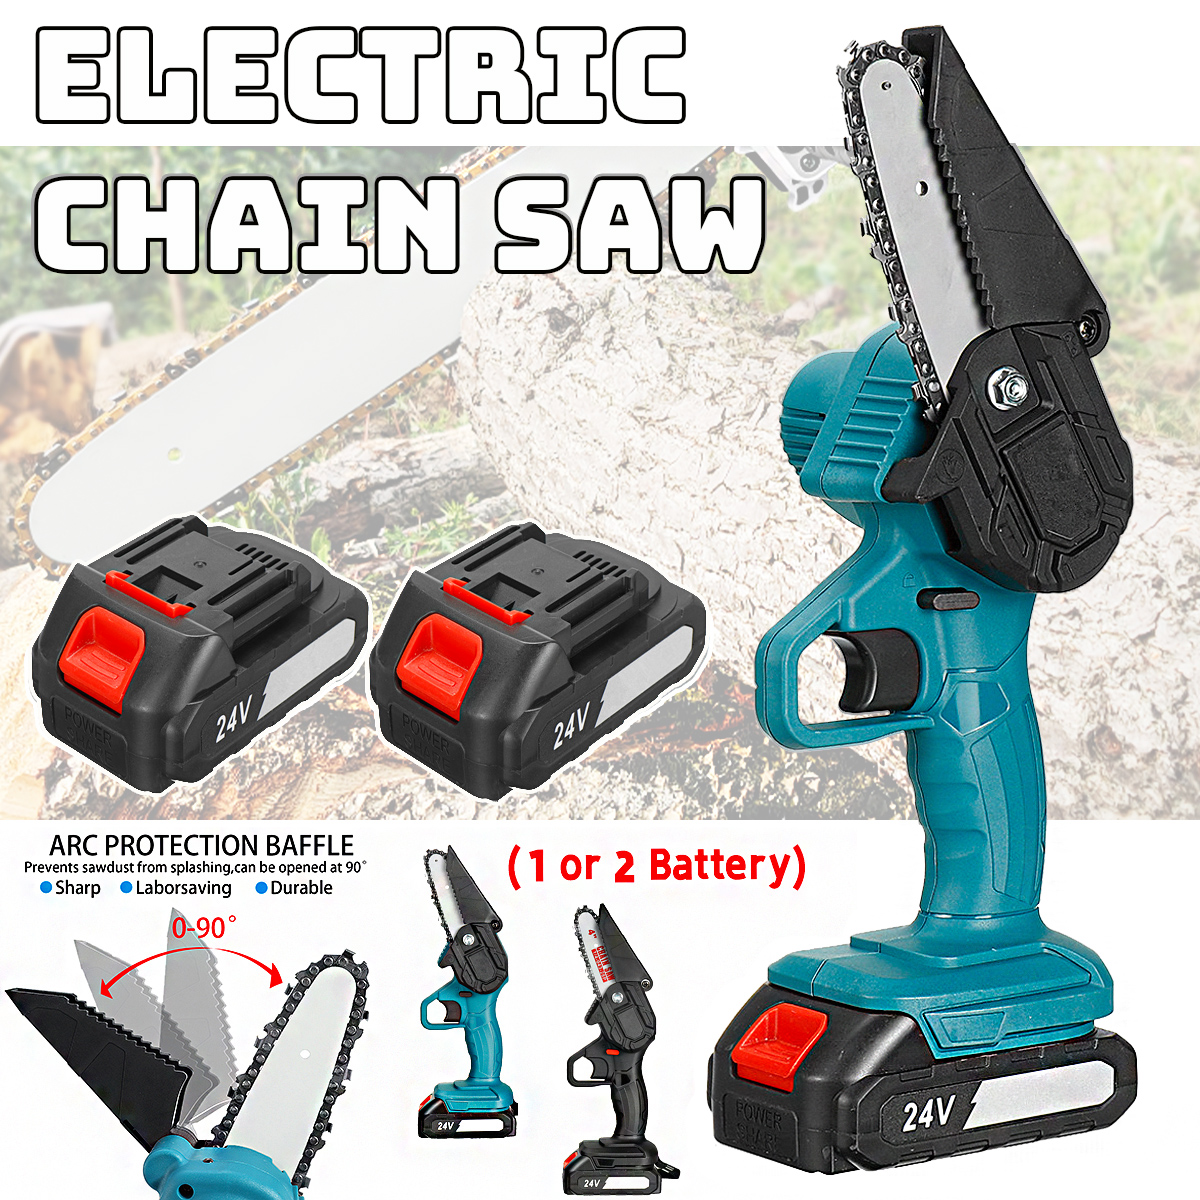 4-Inch-Electric-Chainsaws-Rechargeable-Portable-Chain-Saw-Woodworking-Tool-Wood-Cutter-W-12-Battery-1860314-3